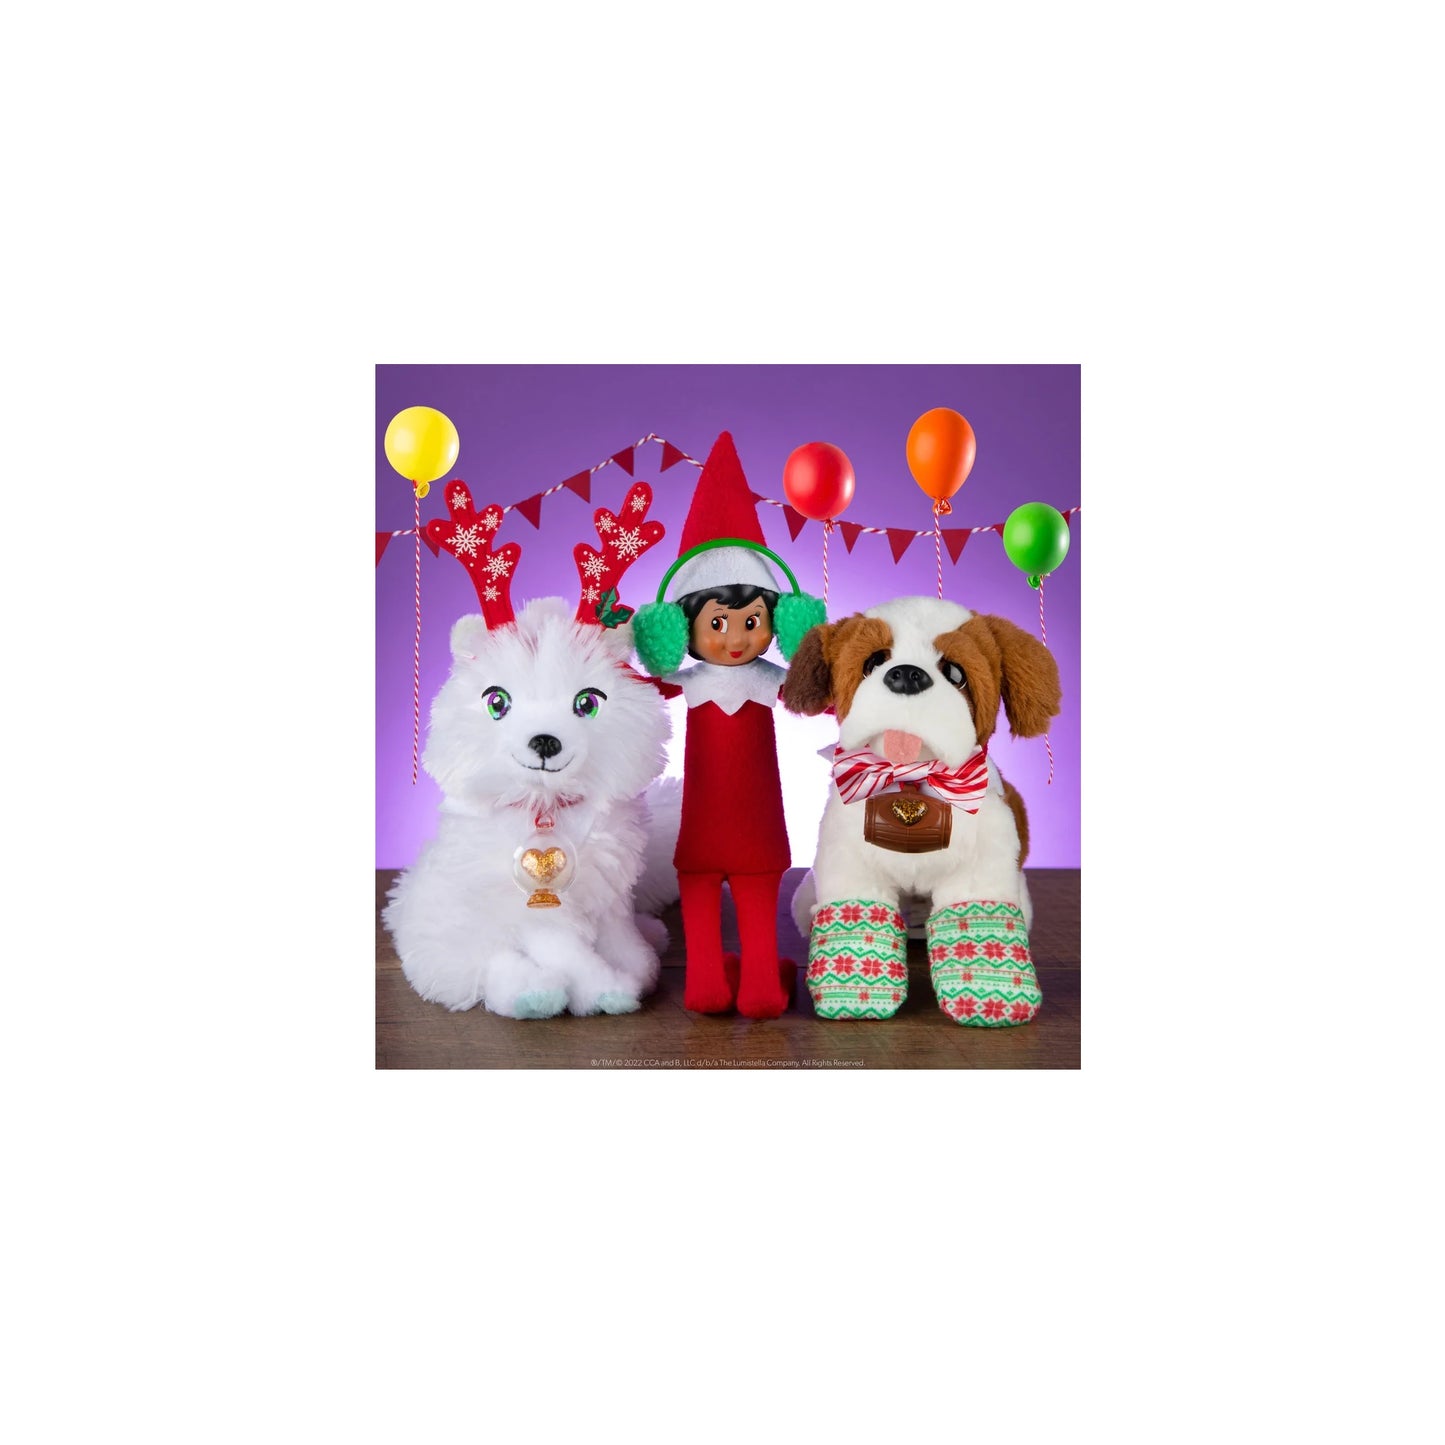 The Elf on The Shelf Claus Couture Dress Up Party Pack